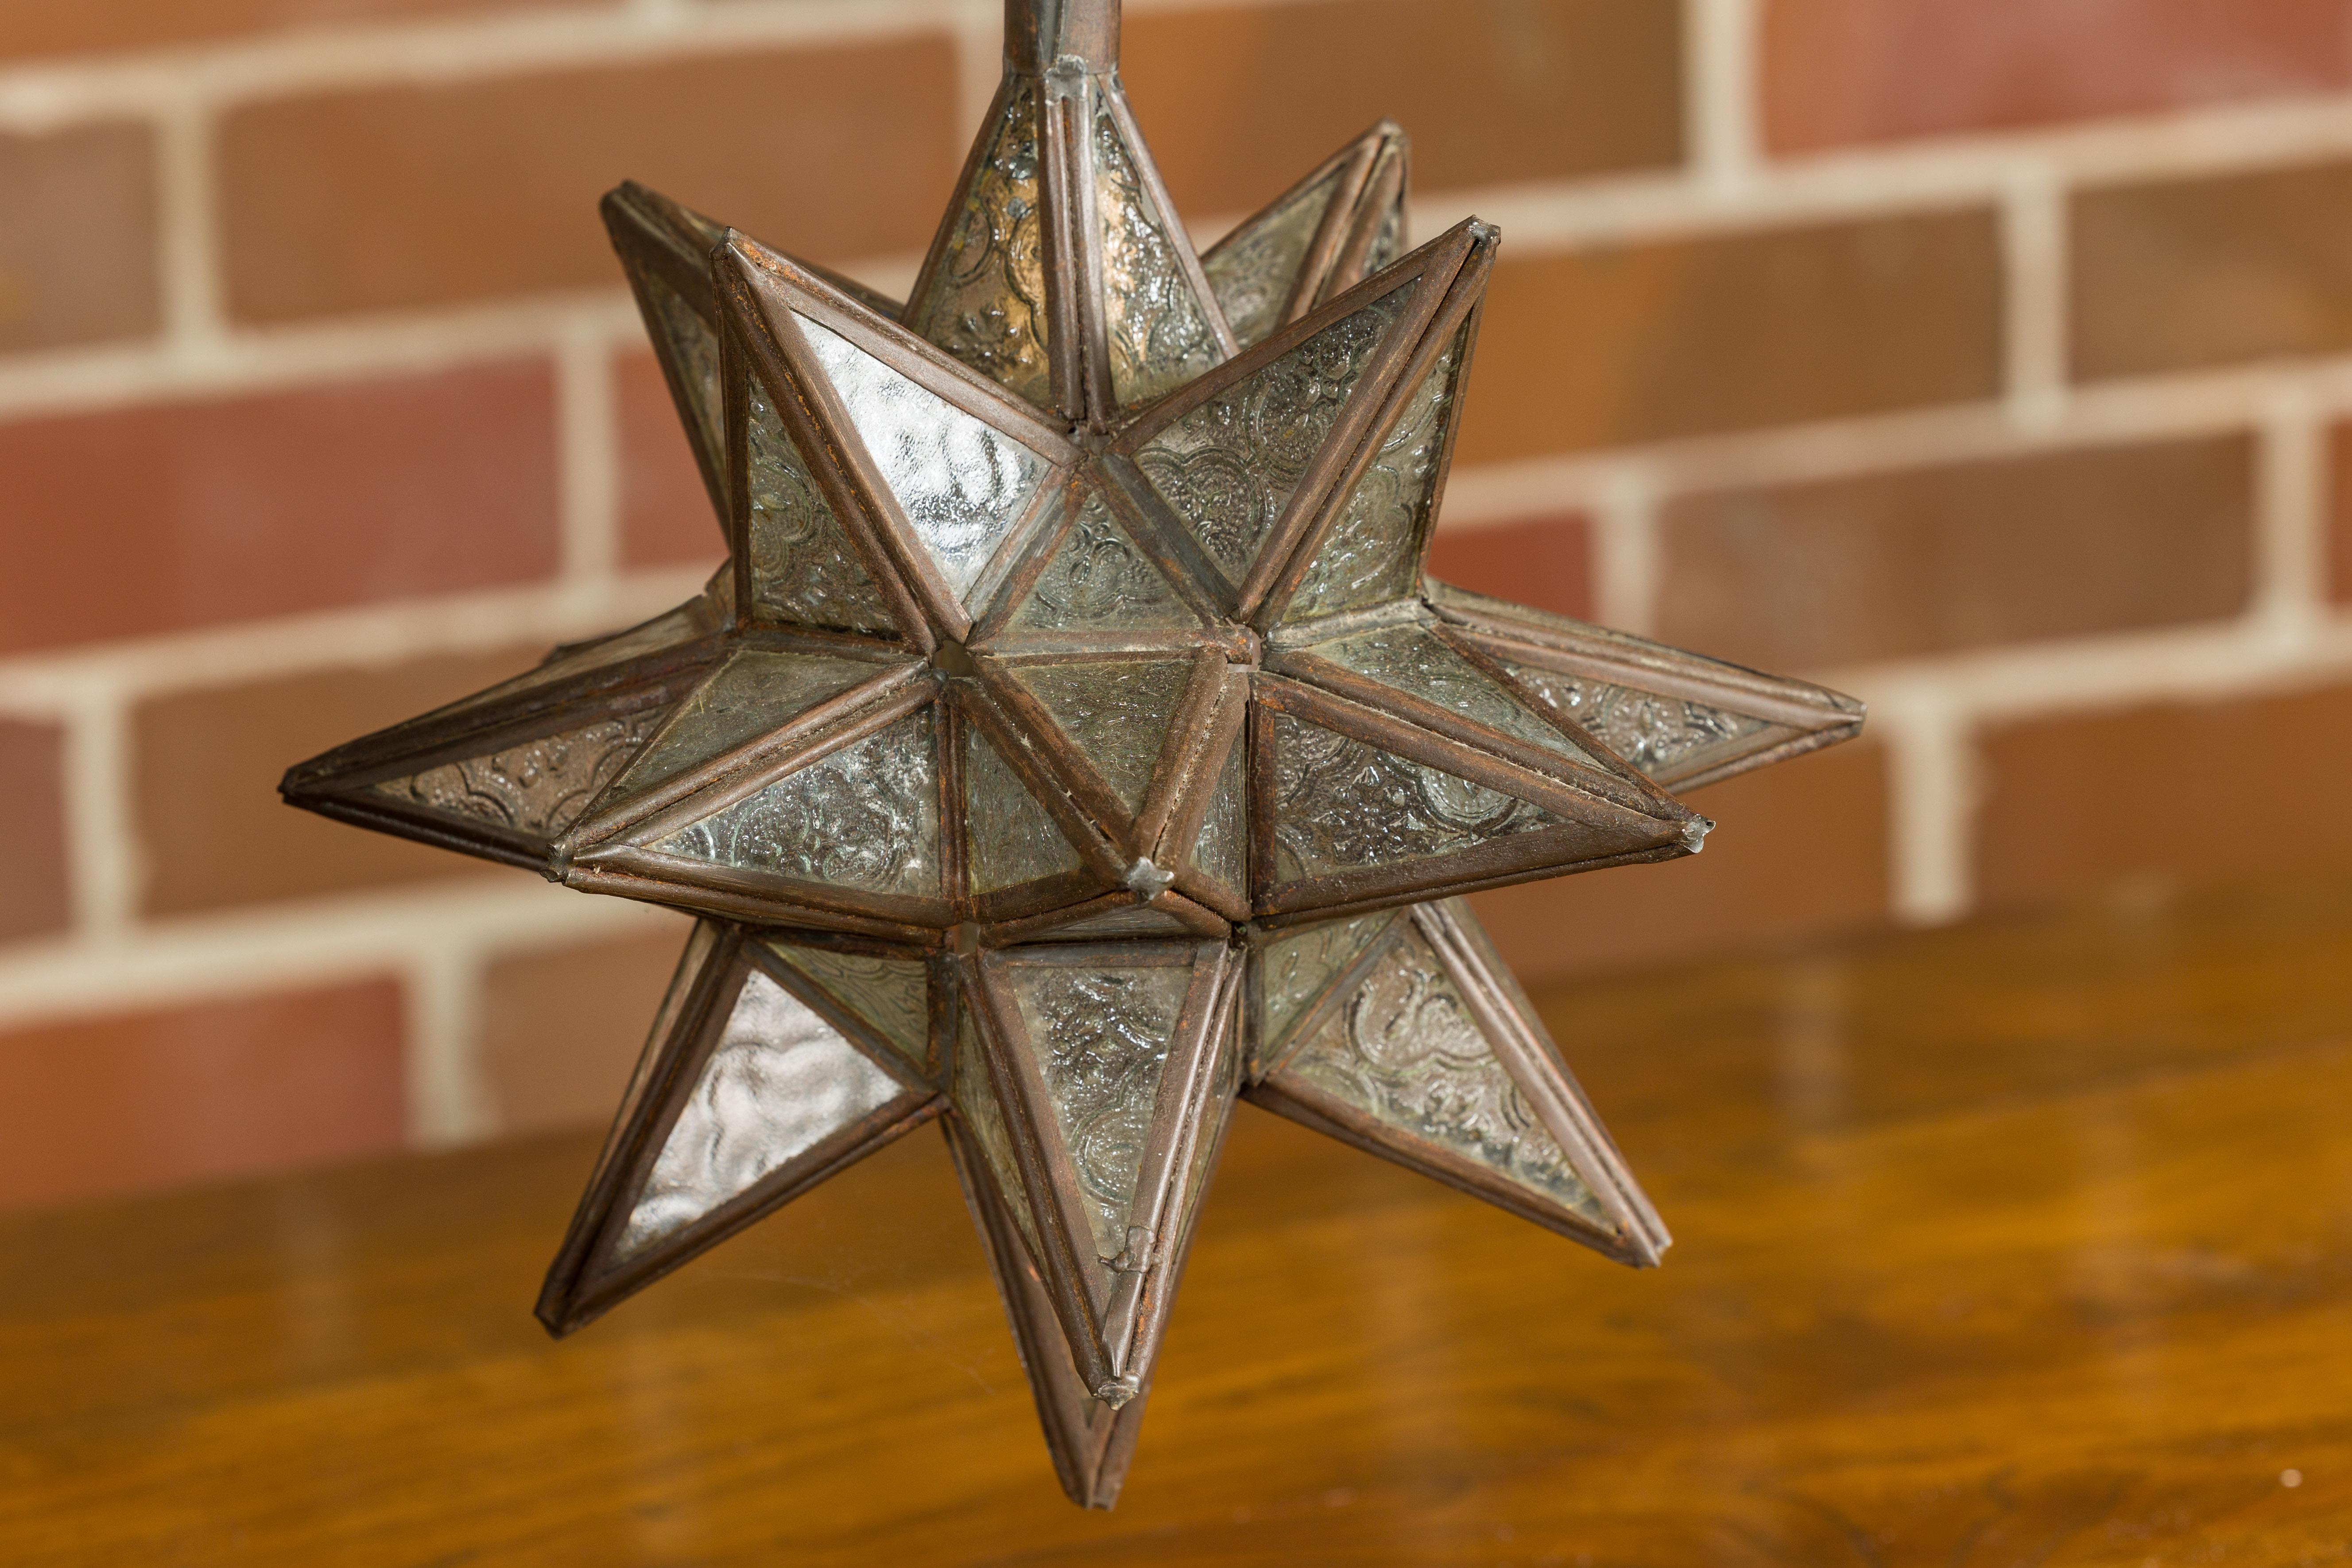 Midcentury French Star Light Fixture with Textured Glass and Single Socket In Good Condition For Sale In Atlanta, GA